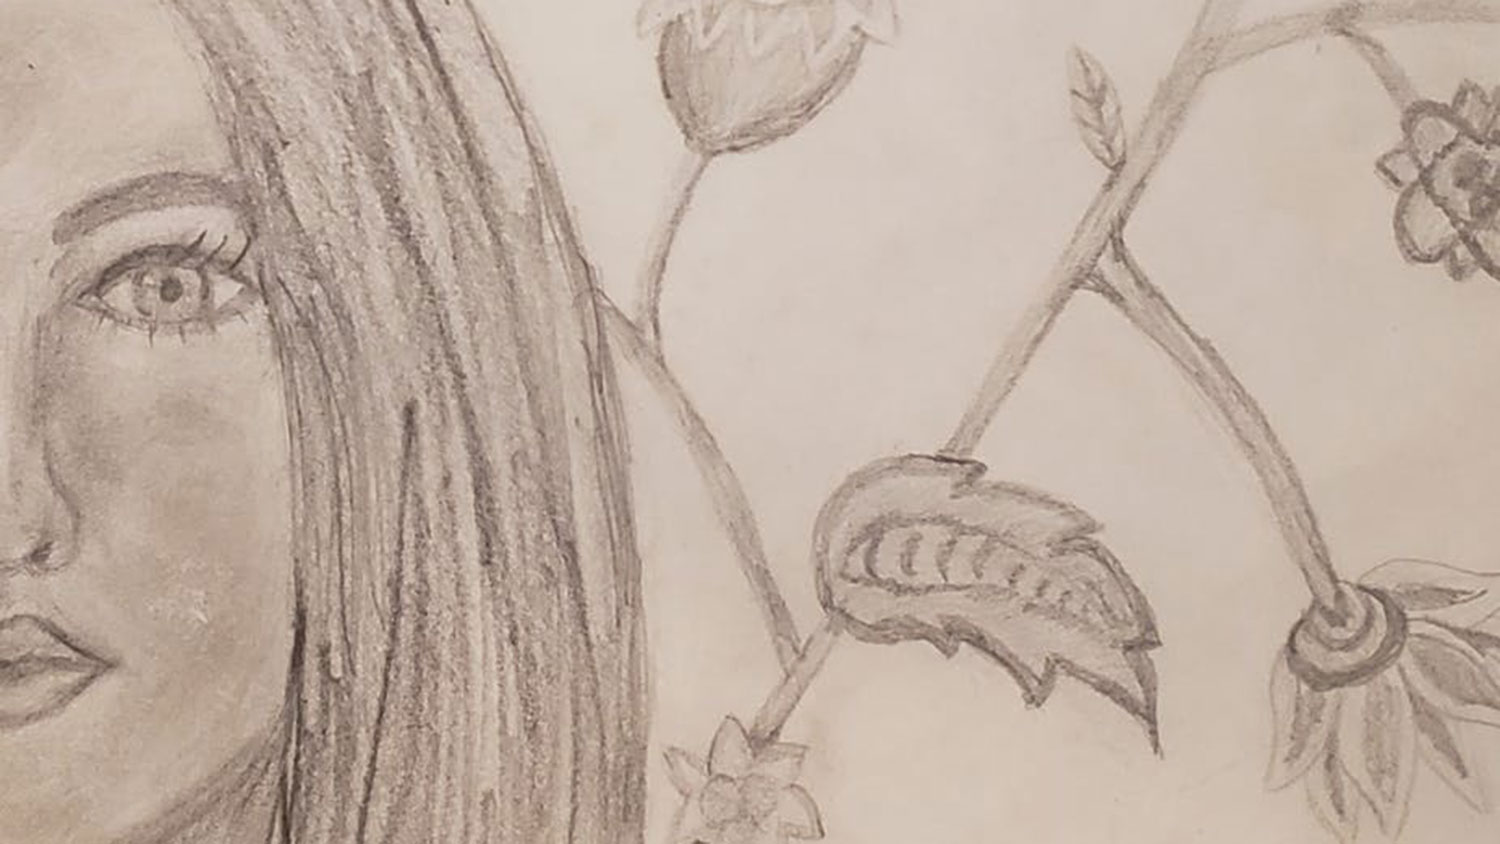 self-portrait sketch of a woman with flowers